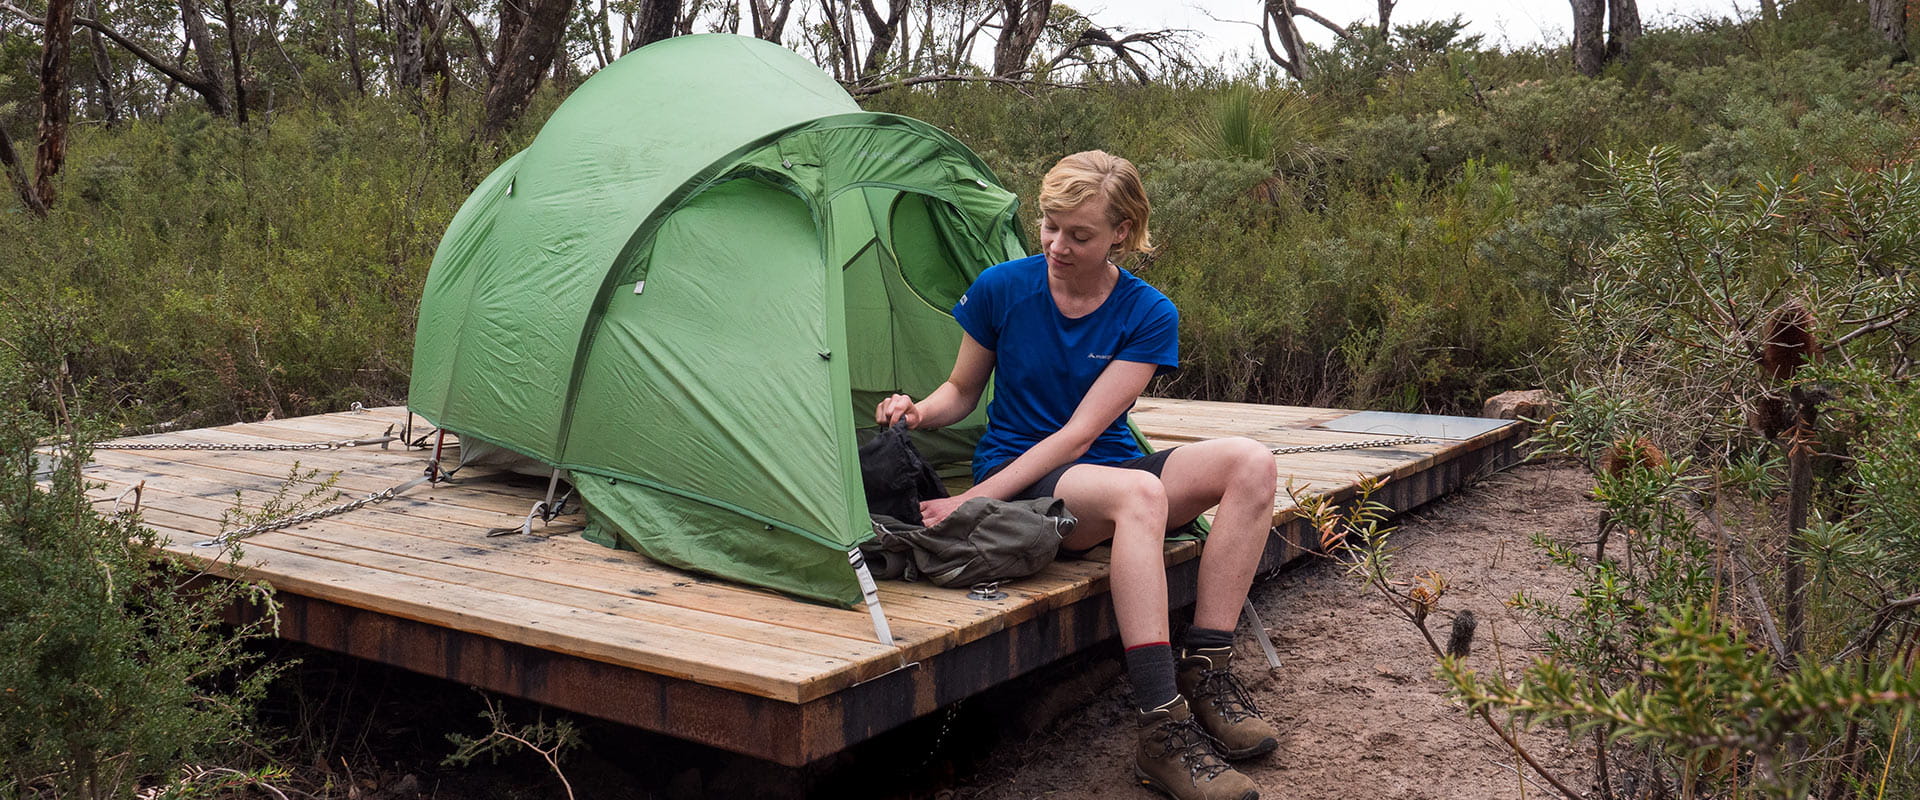 A hiker sits on a tent pad setting up the tent and surrounded by short native foliage